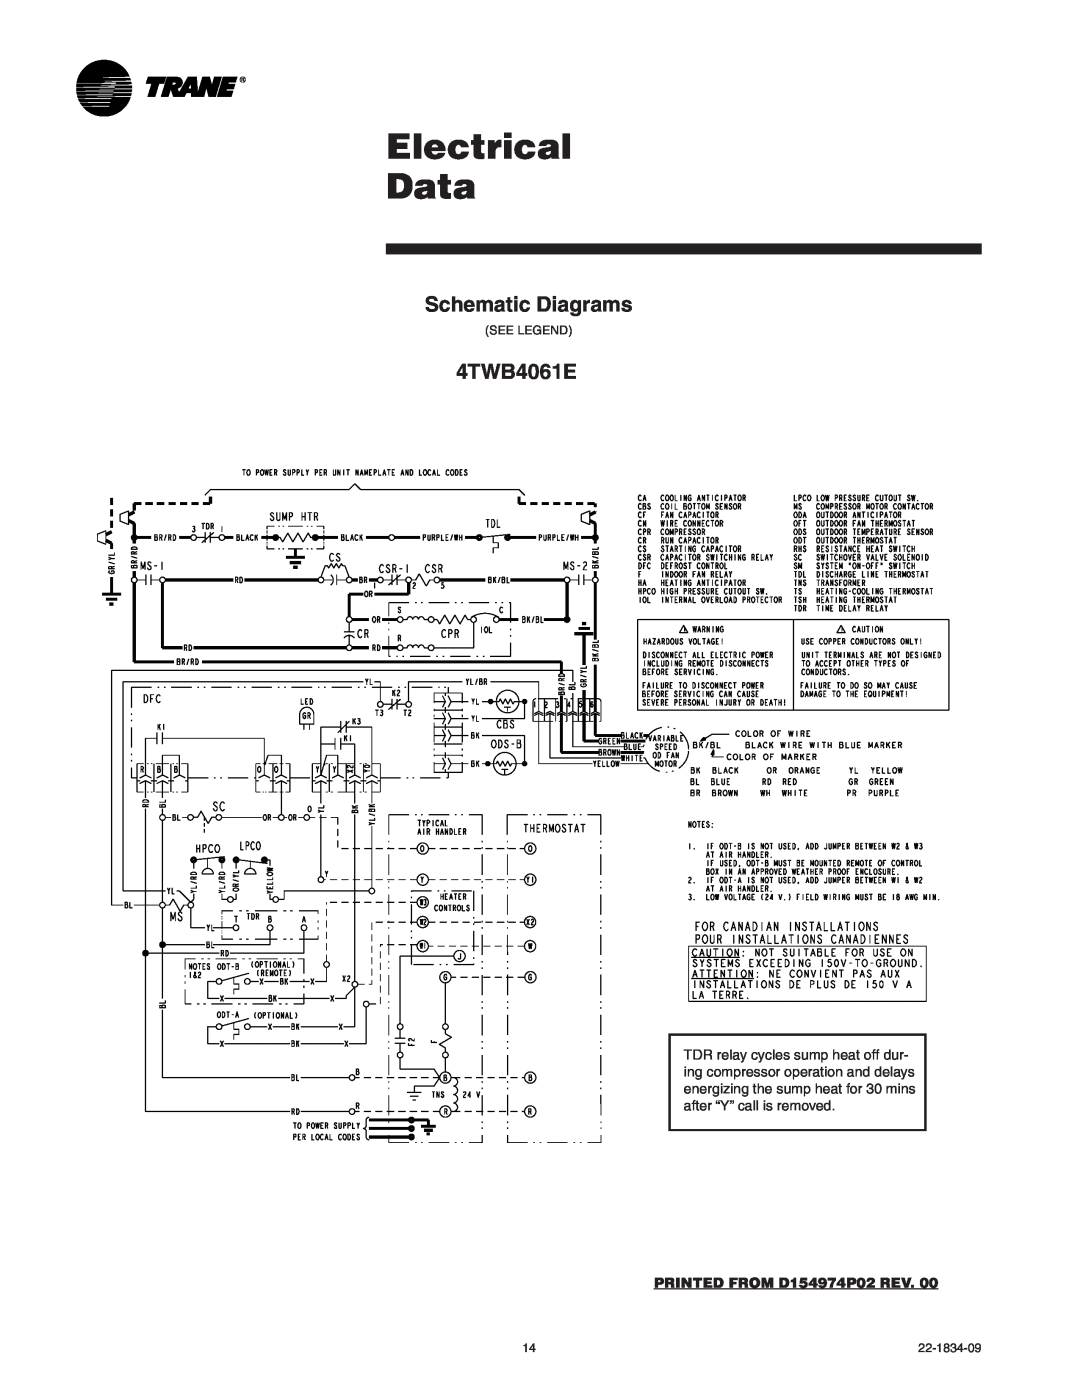 Trane manual Electrical Data, Schematic Diagrams, 4TWB4061E, PRINTED FROM D154974P02 REV 